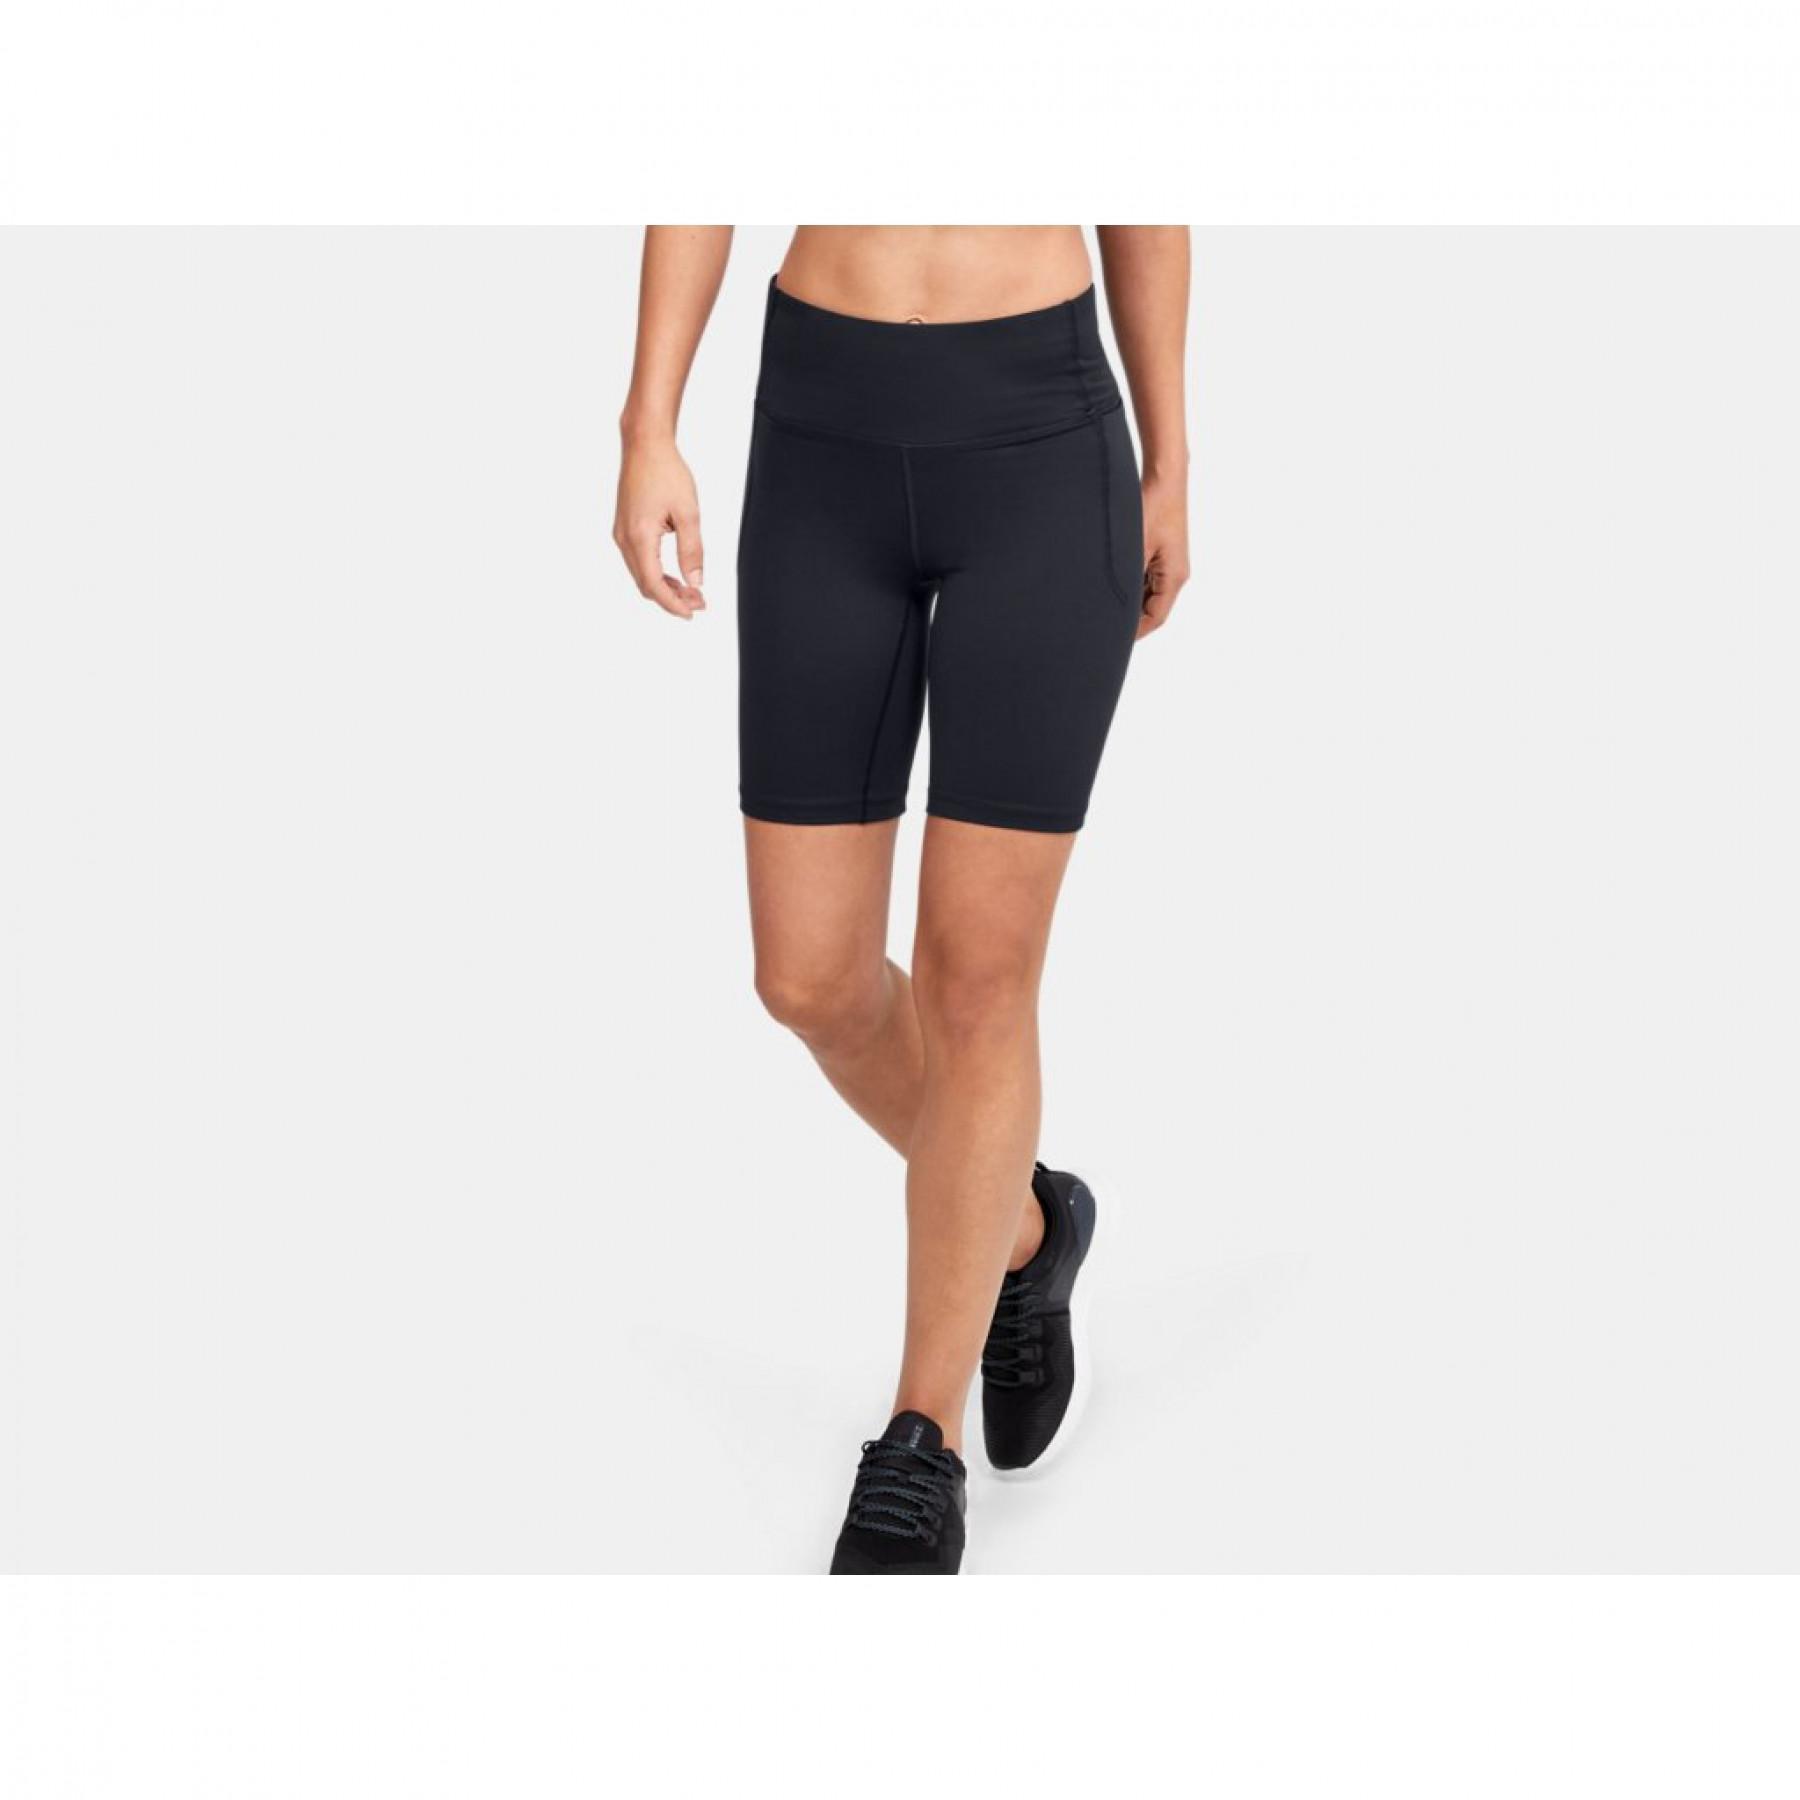 Cycling shorts for women Under Armour Meridian